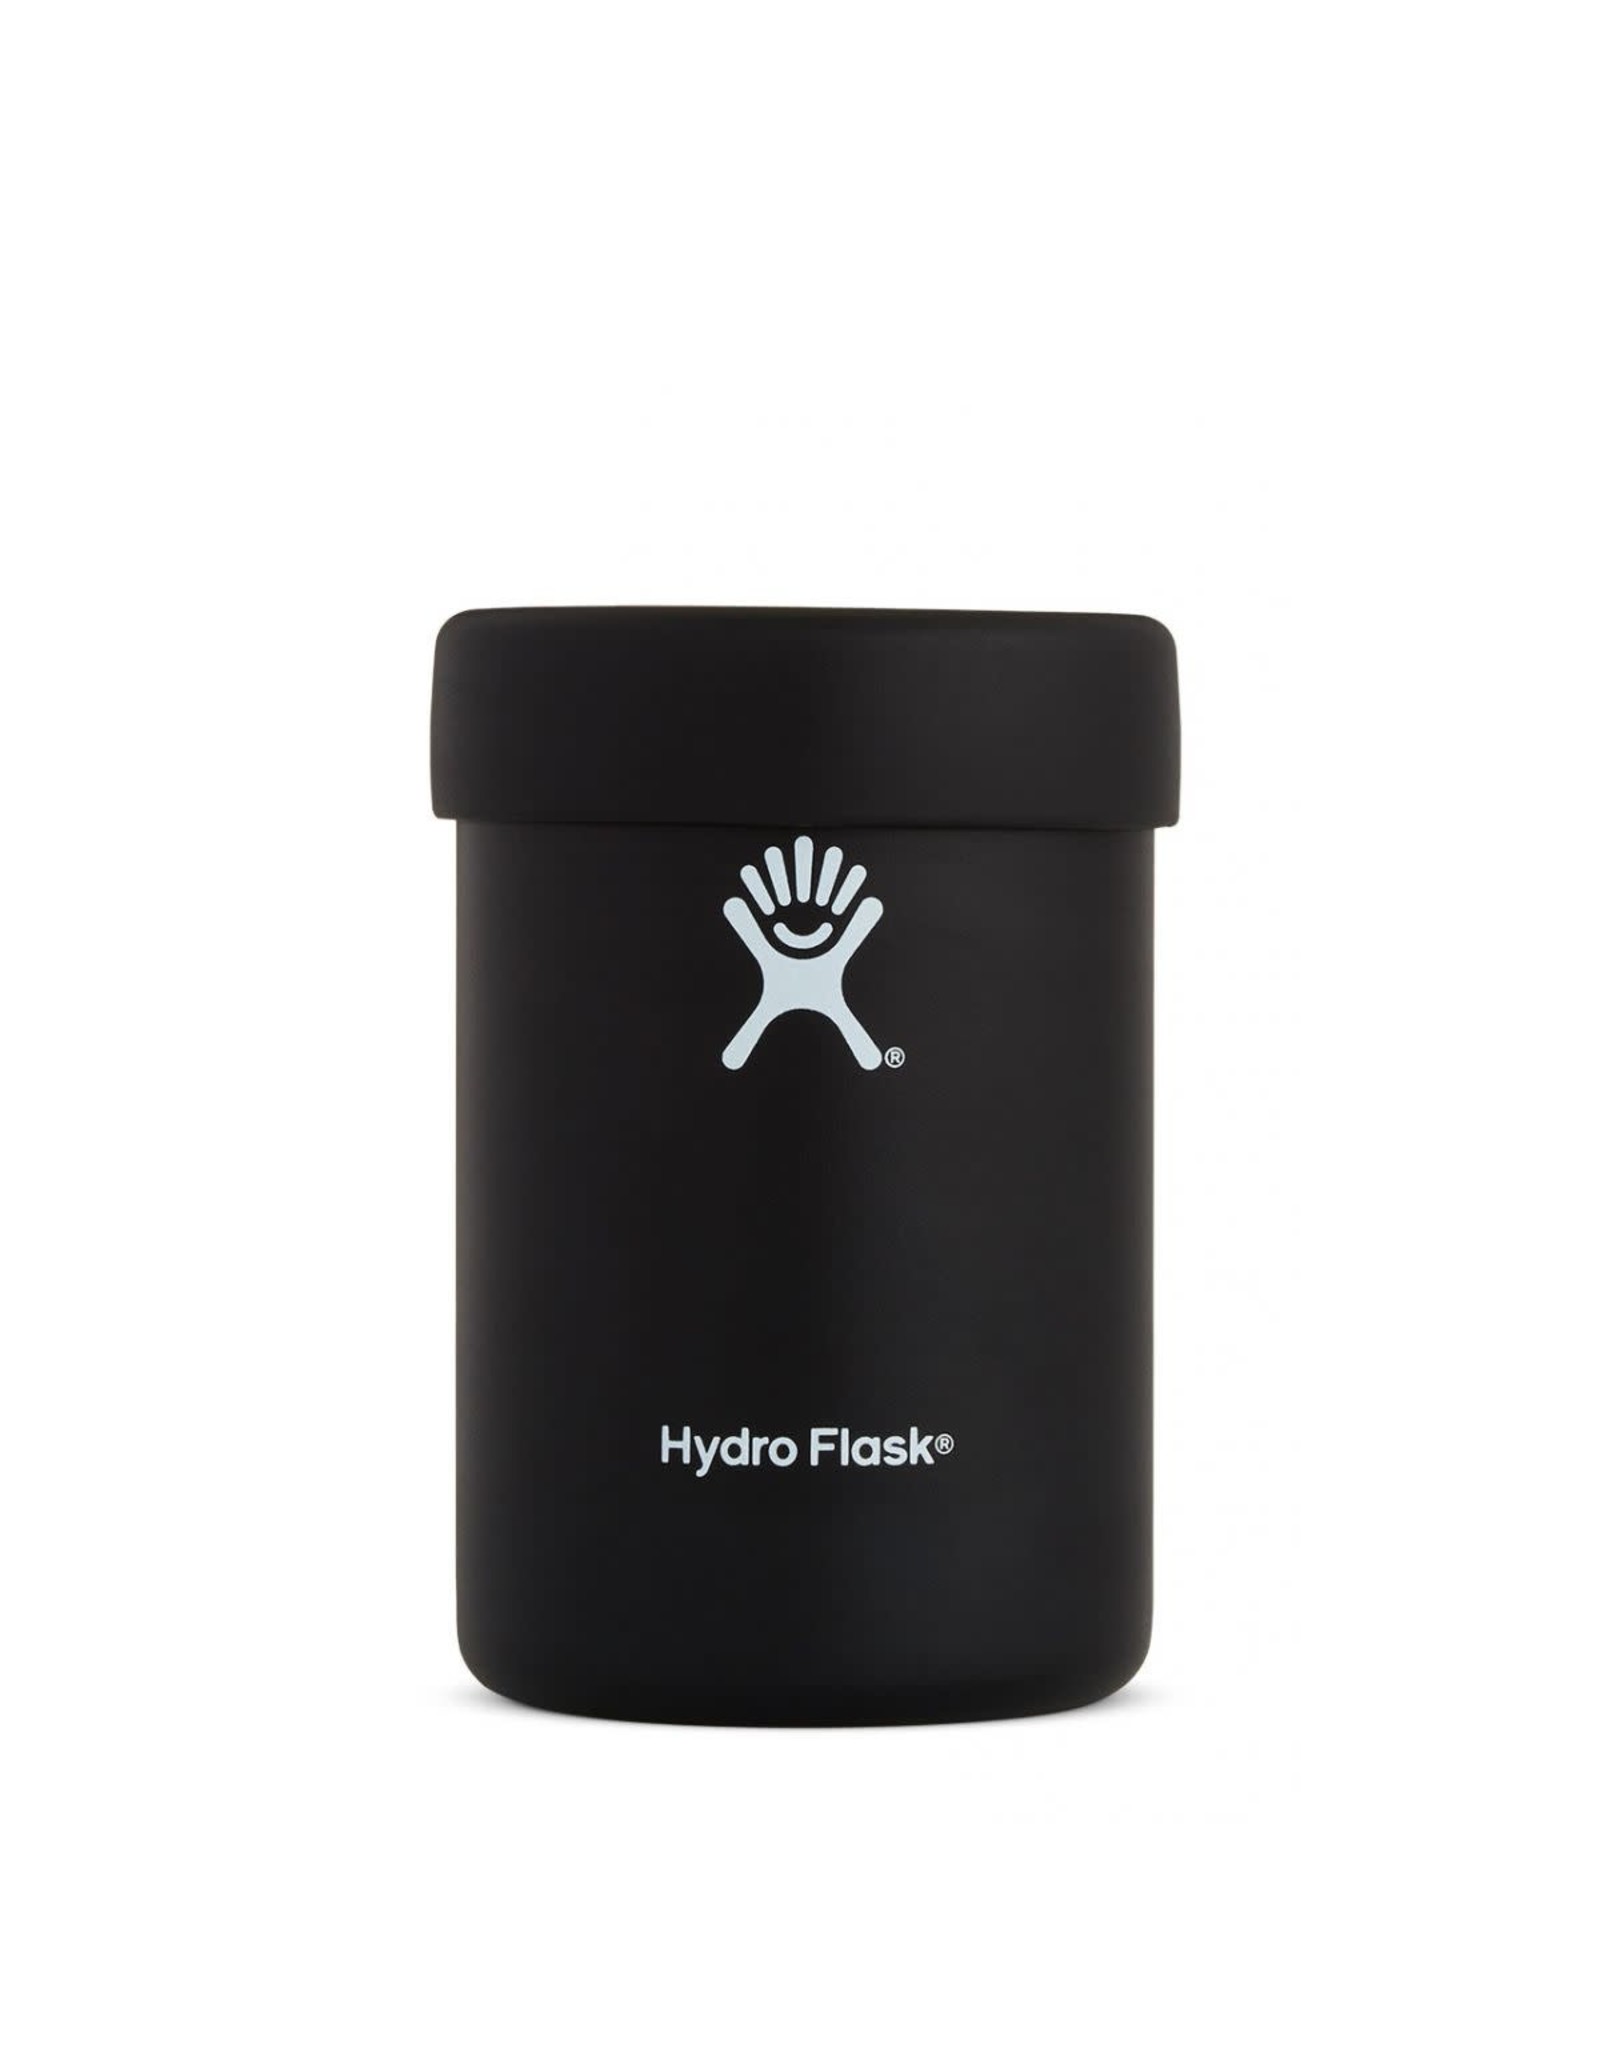 Hydro Flask Hydro Flask Cooler Cup Black